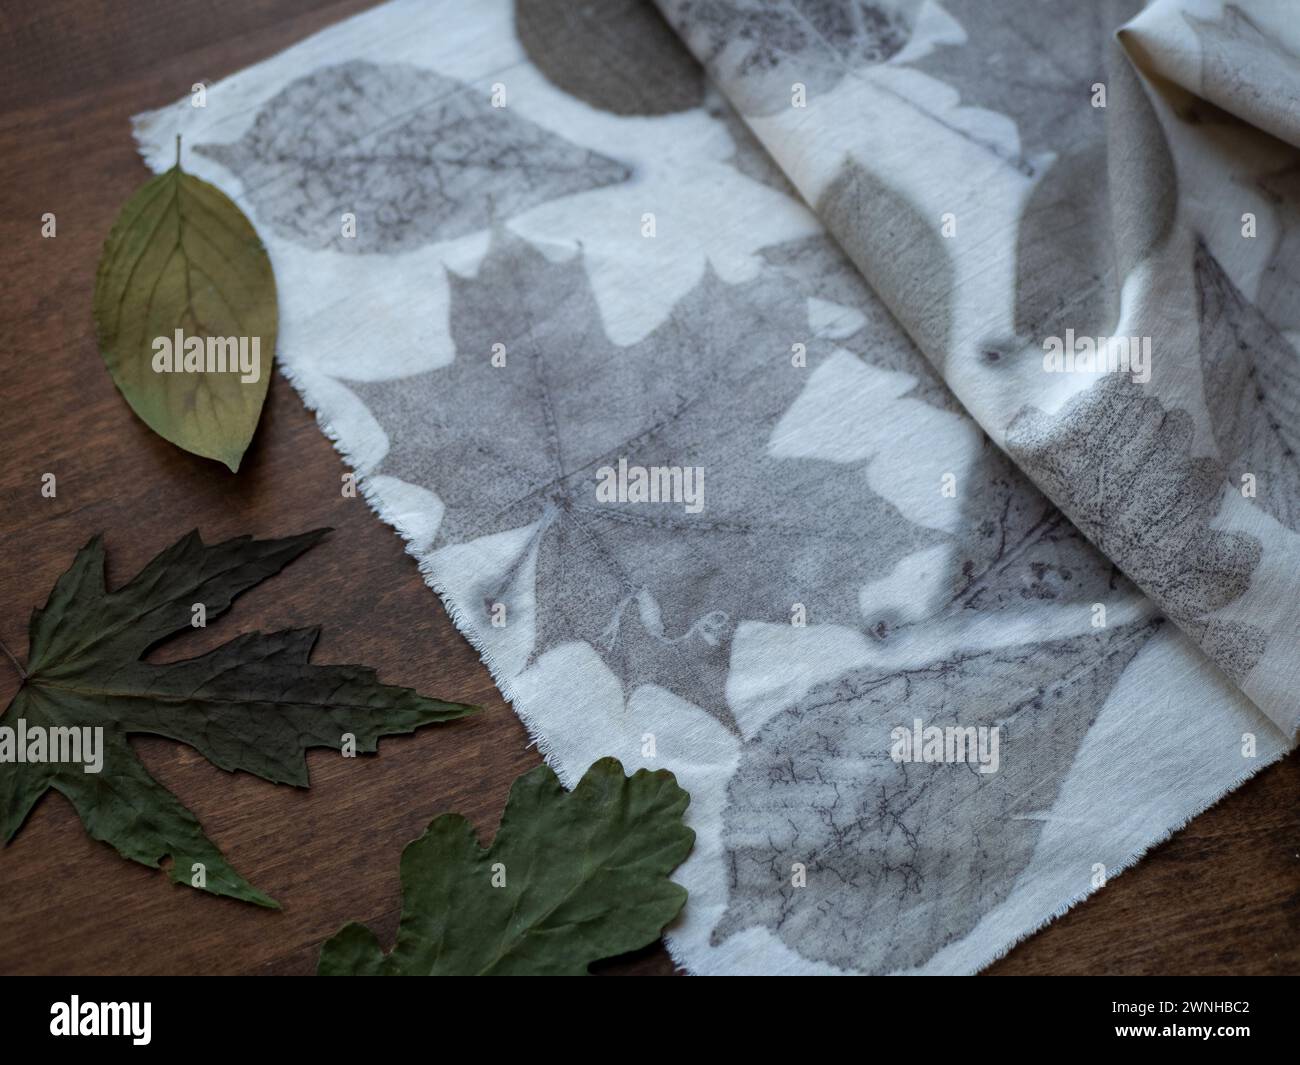 Eco-printed fabric and dried leaves on the wooden table, selective focus. Natural dye experiment Stock Photo